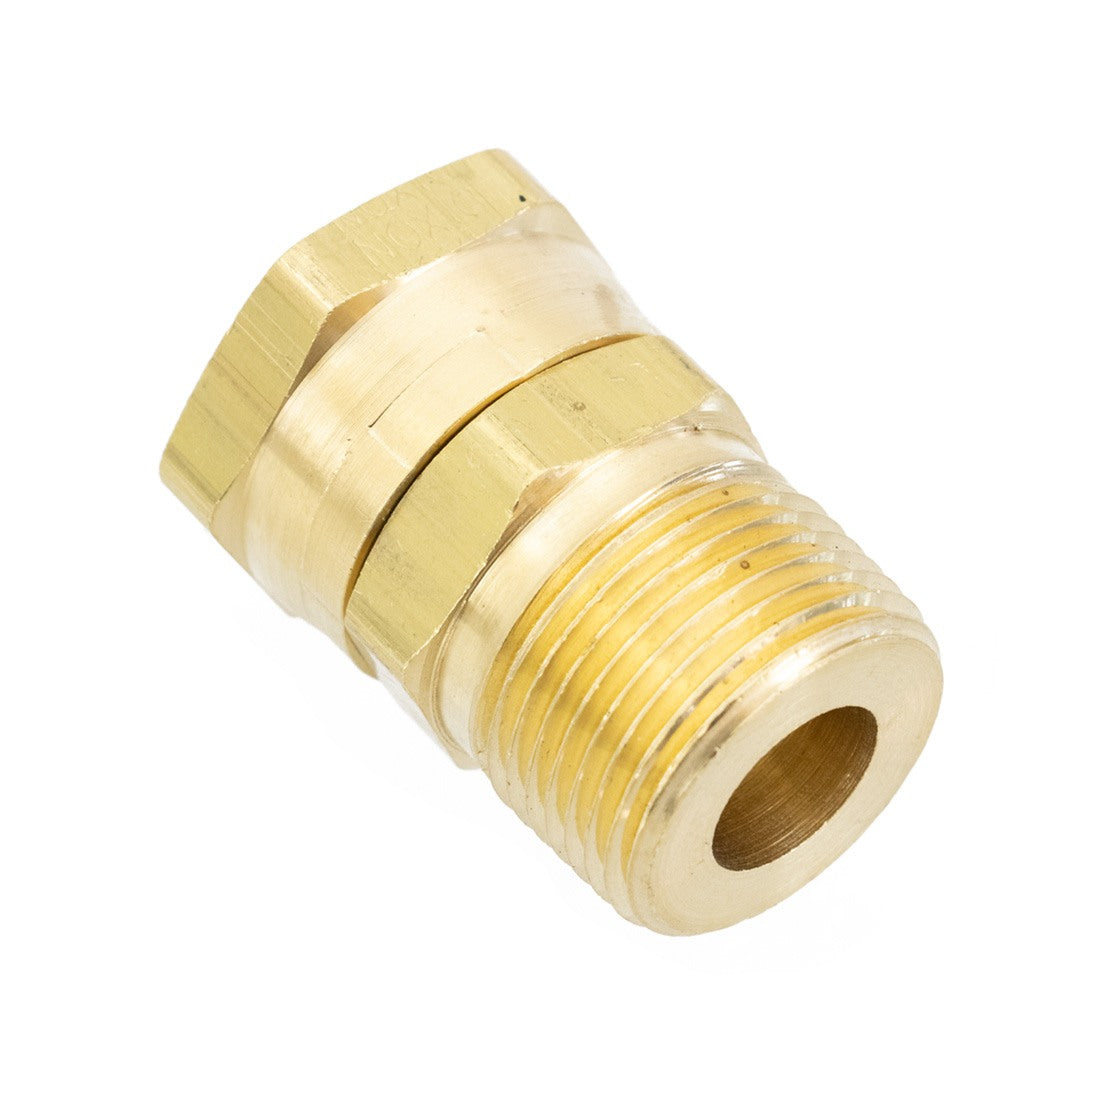 XERO DI Tank Replacement Fittings - Garden Hose to Female Swivel Adapter - Tilted Right Top Oblique View